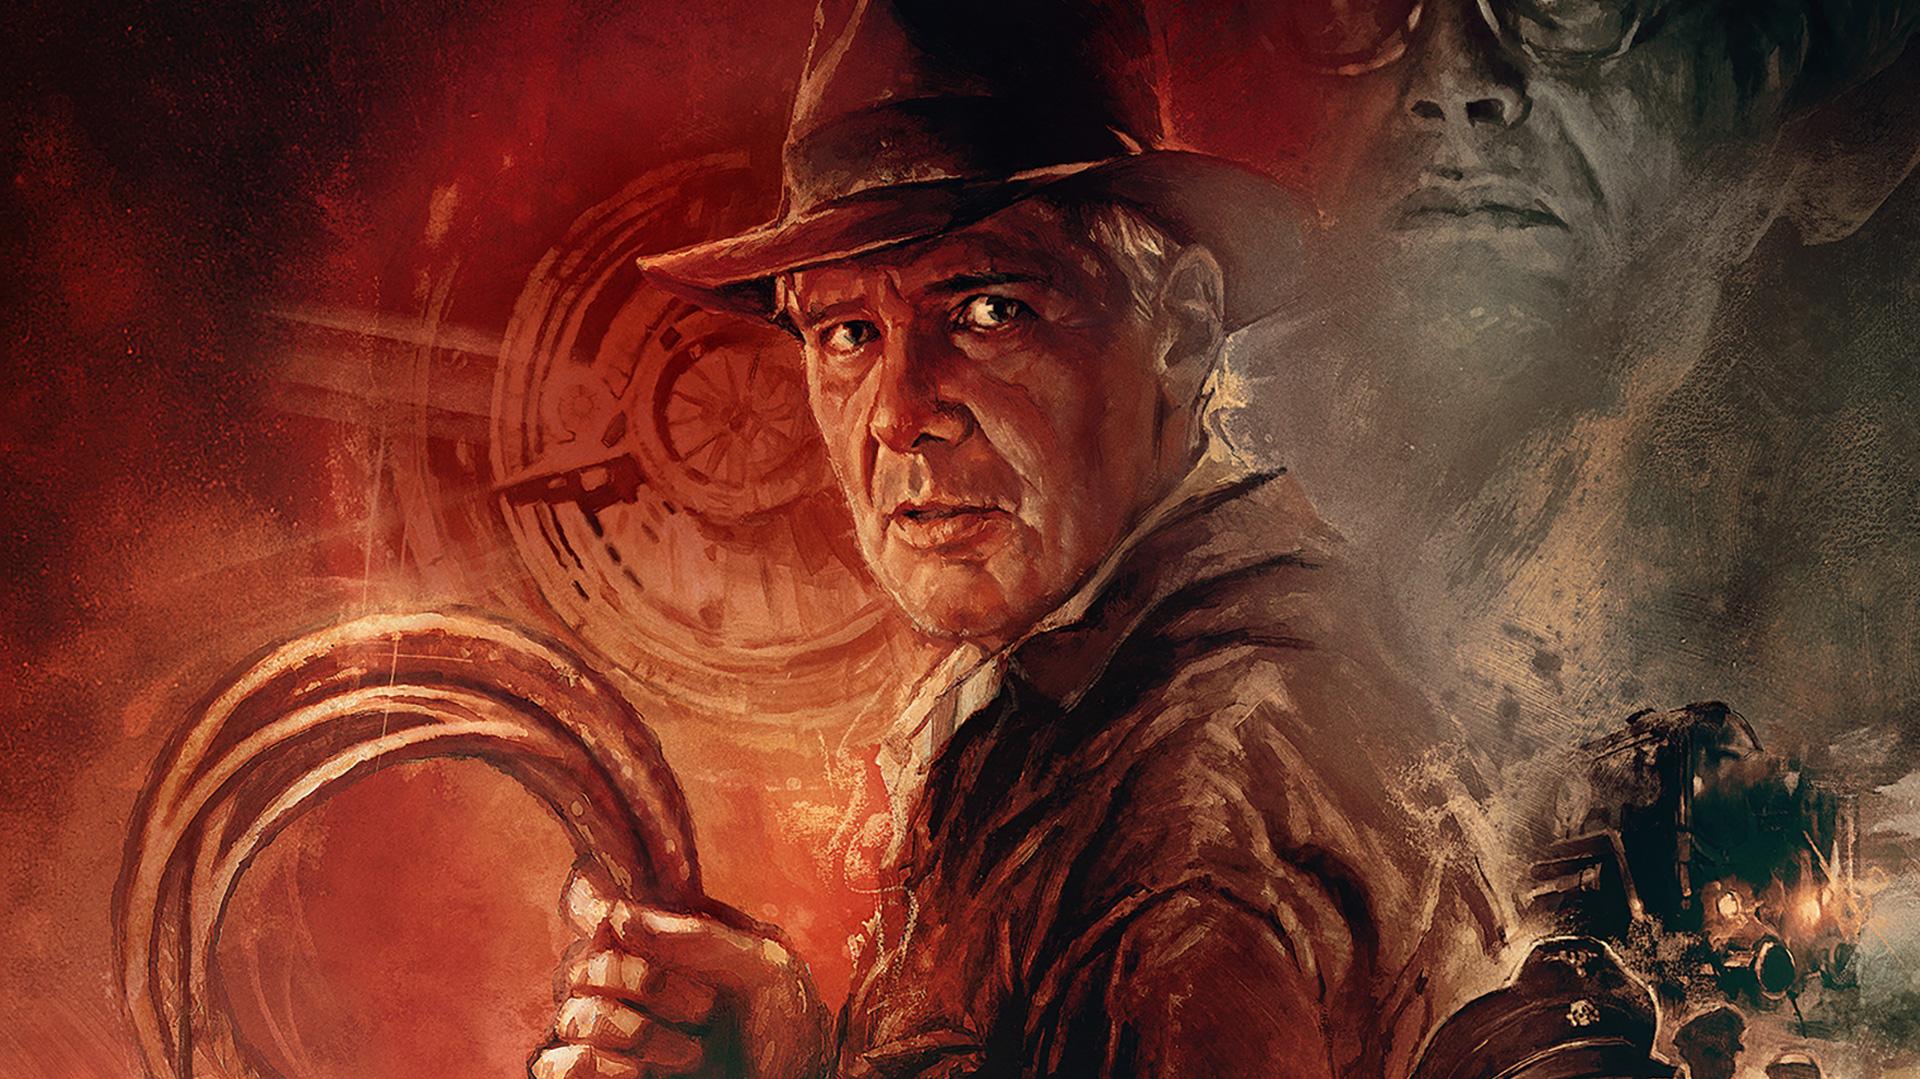 Watch Official Trailer For Indiana Jones And The Dial Of Destiny